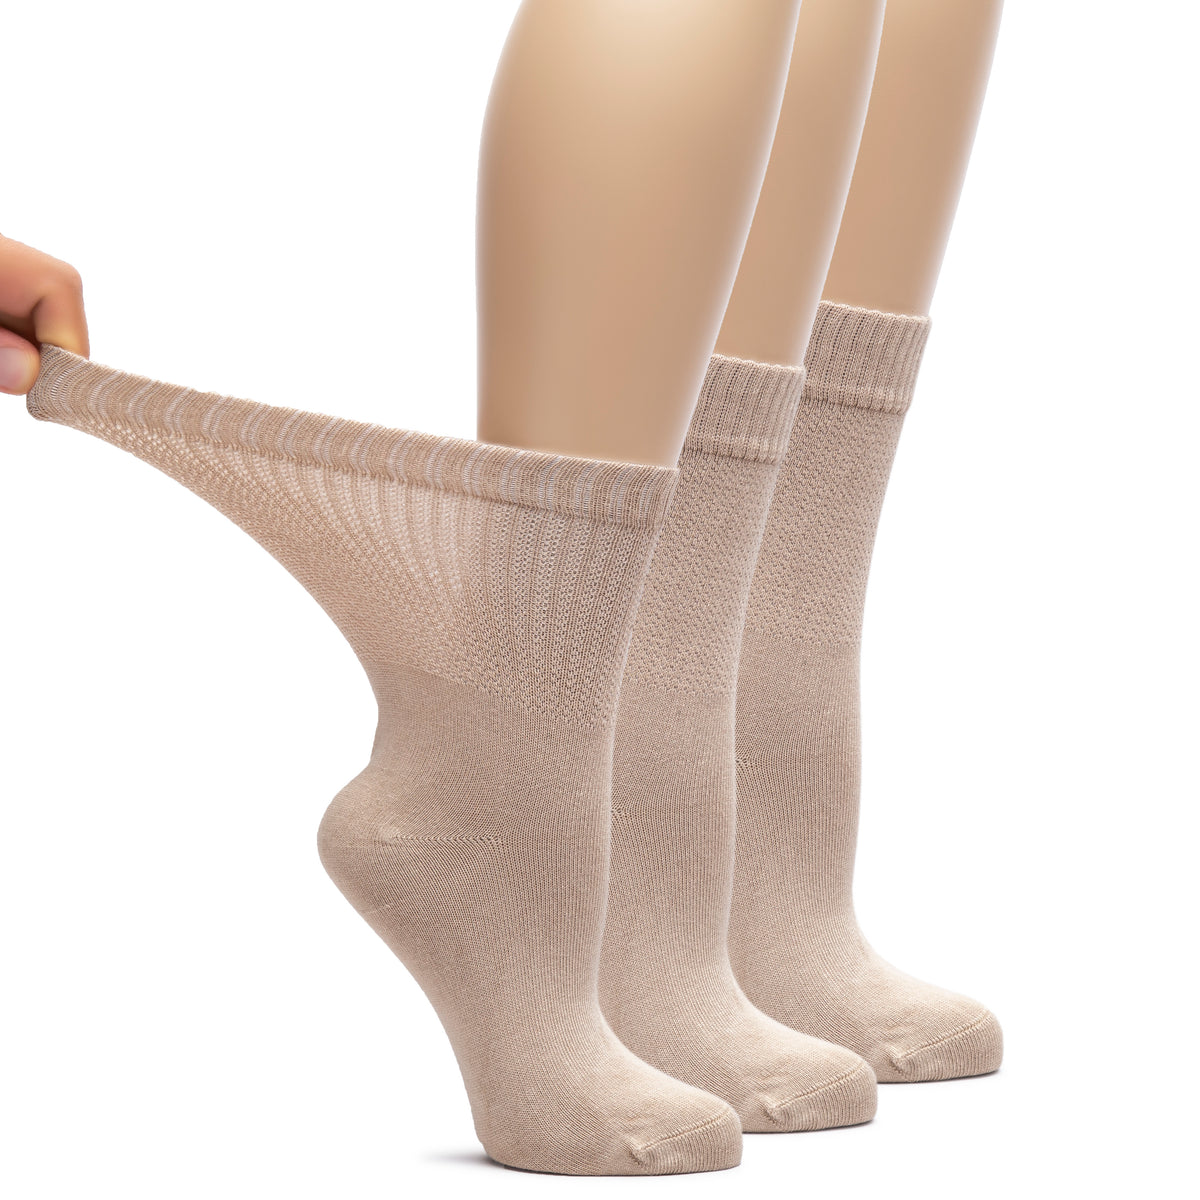 A trio of women's socks made from bamboo material, designed for diabetic individuals. Each pair features one visible leg.